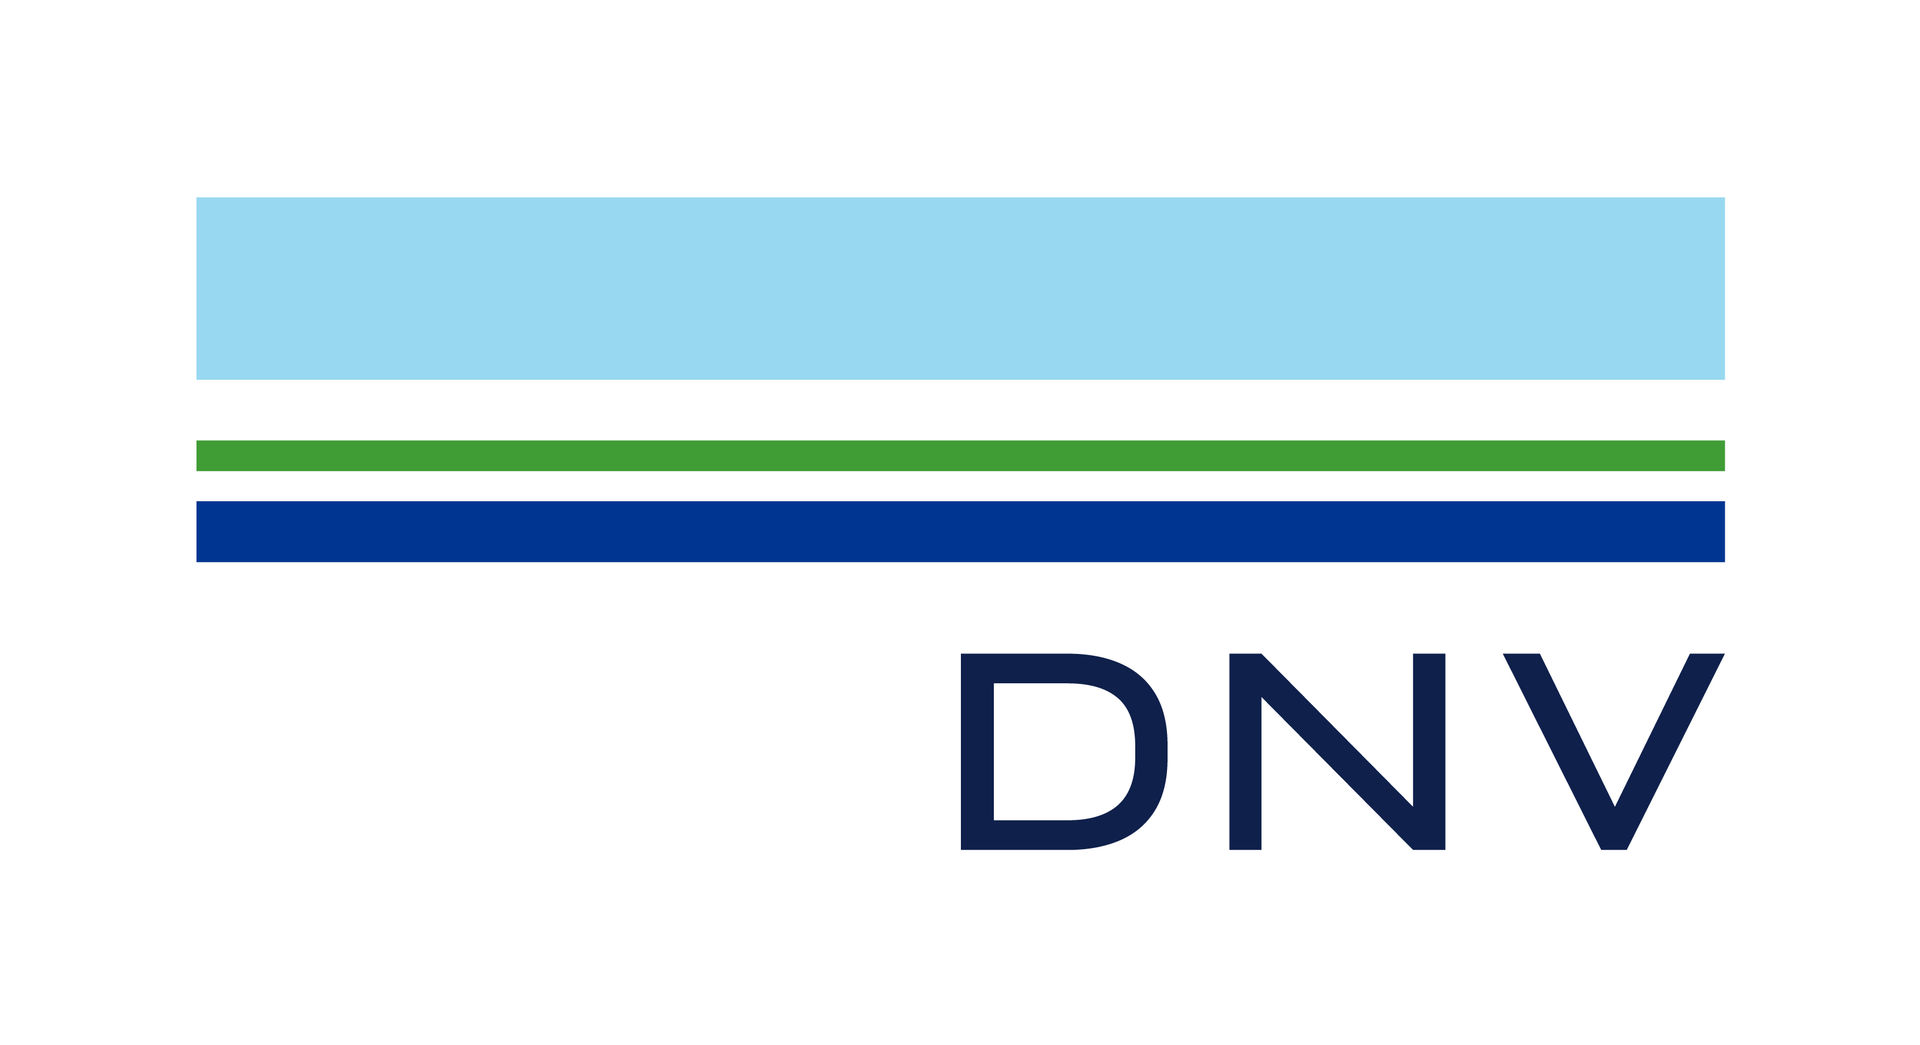 Logo of DNV, the operator of the research platform FINO2